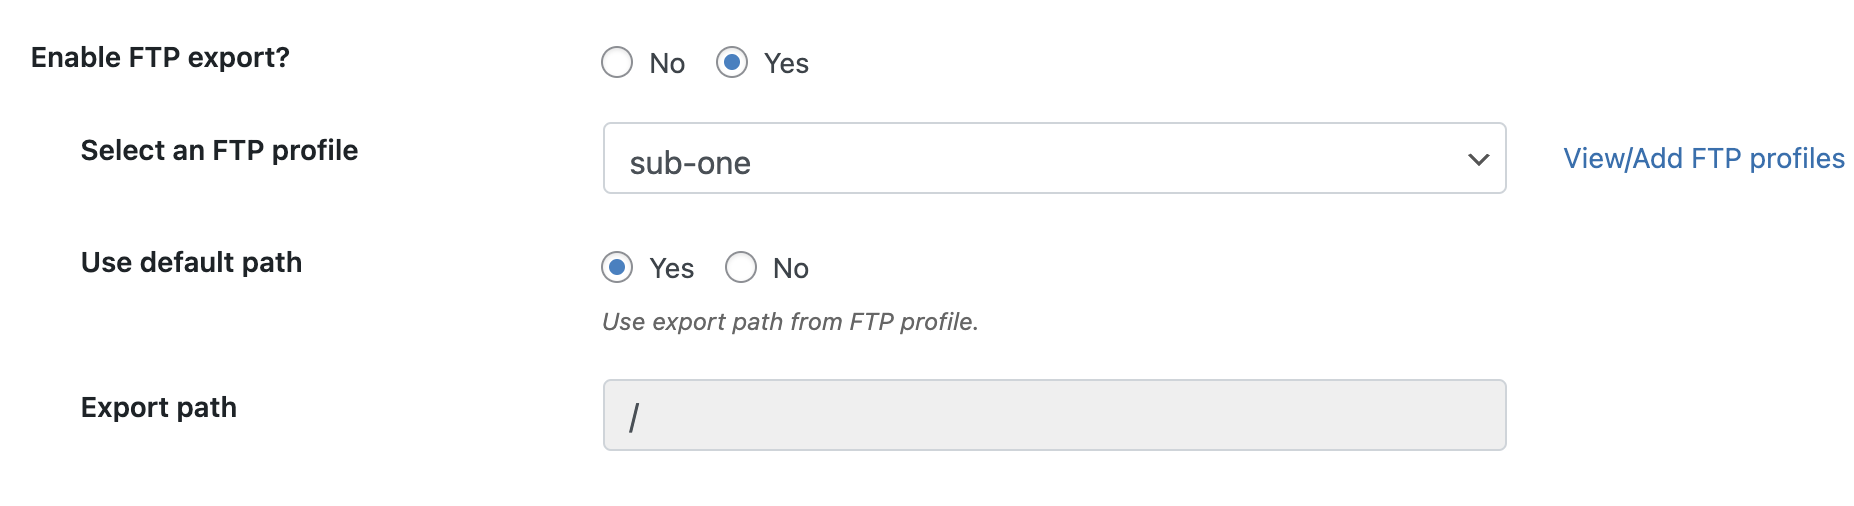 Enable FTP export option